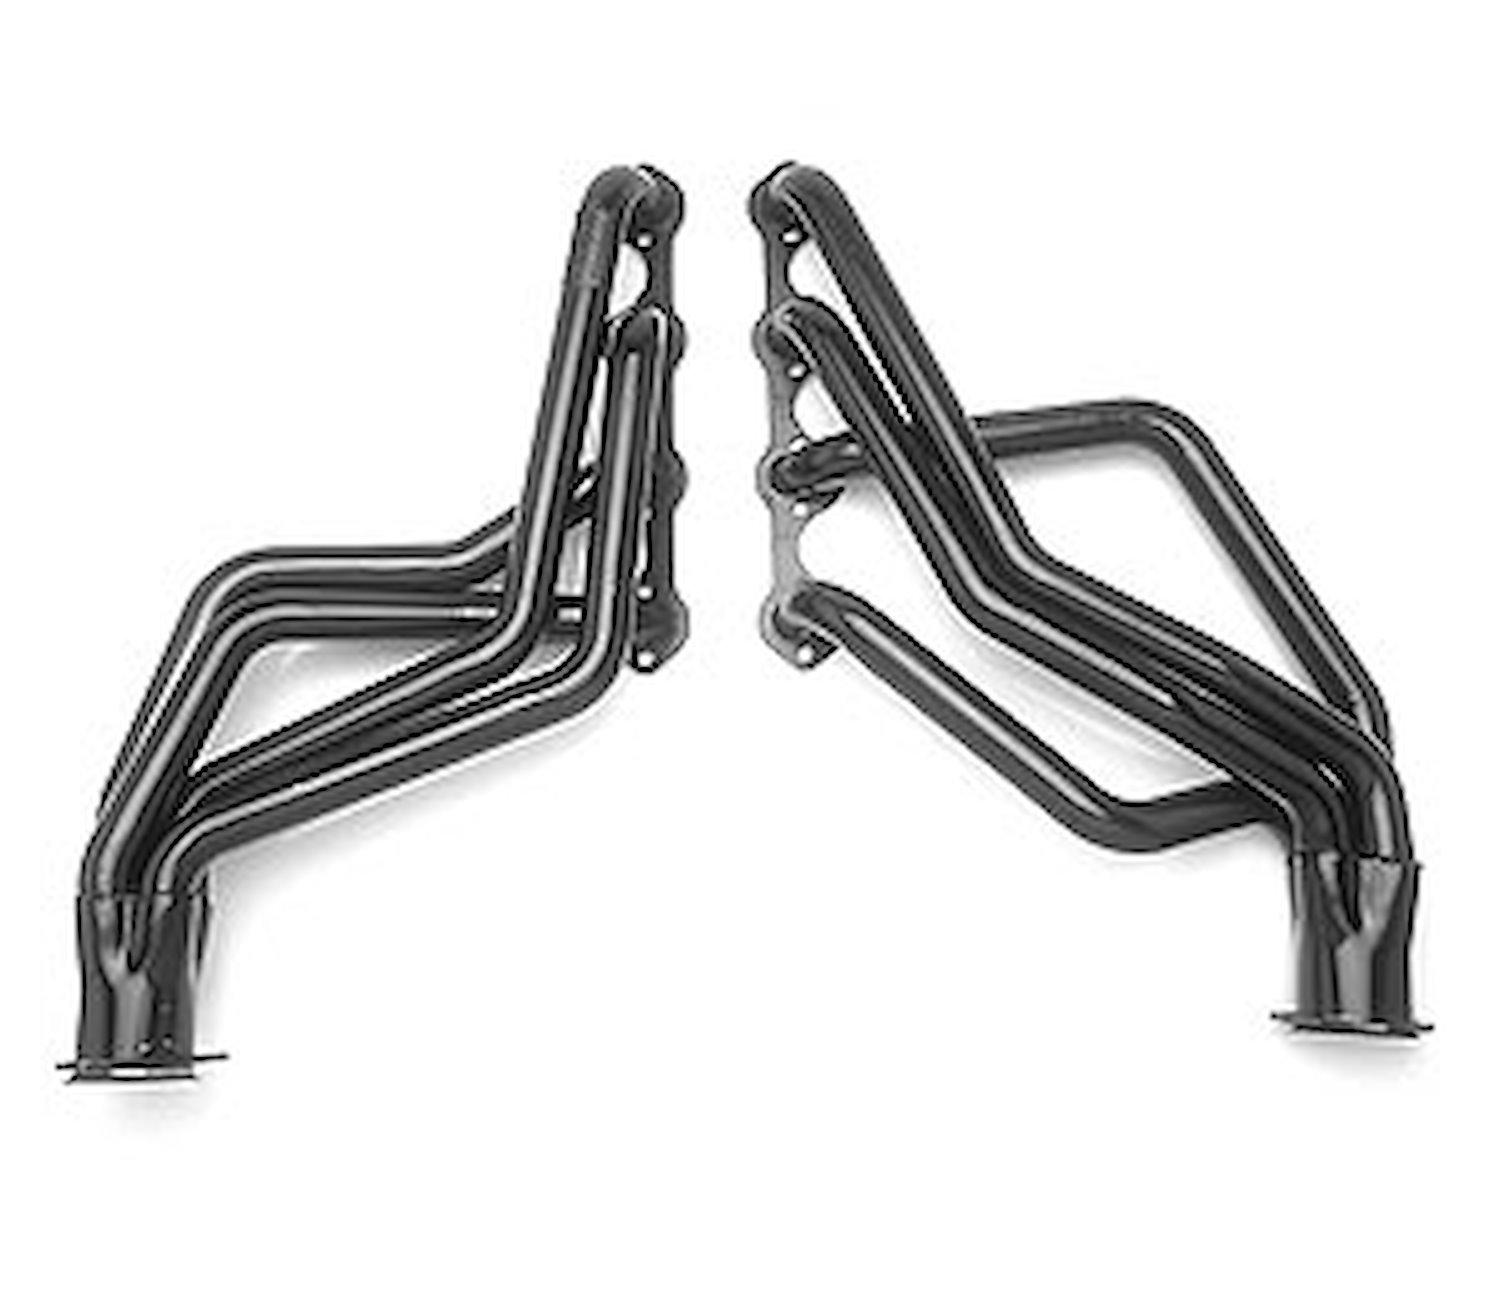 Standard Duty Uncoated Full Length Headers for 1979-93 Mustang 5.0L 302